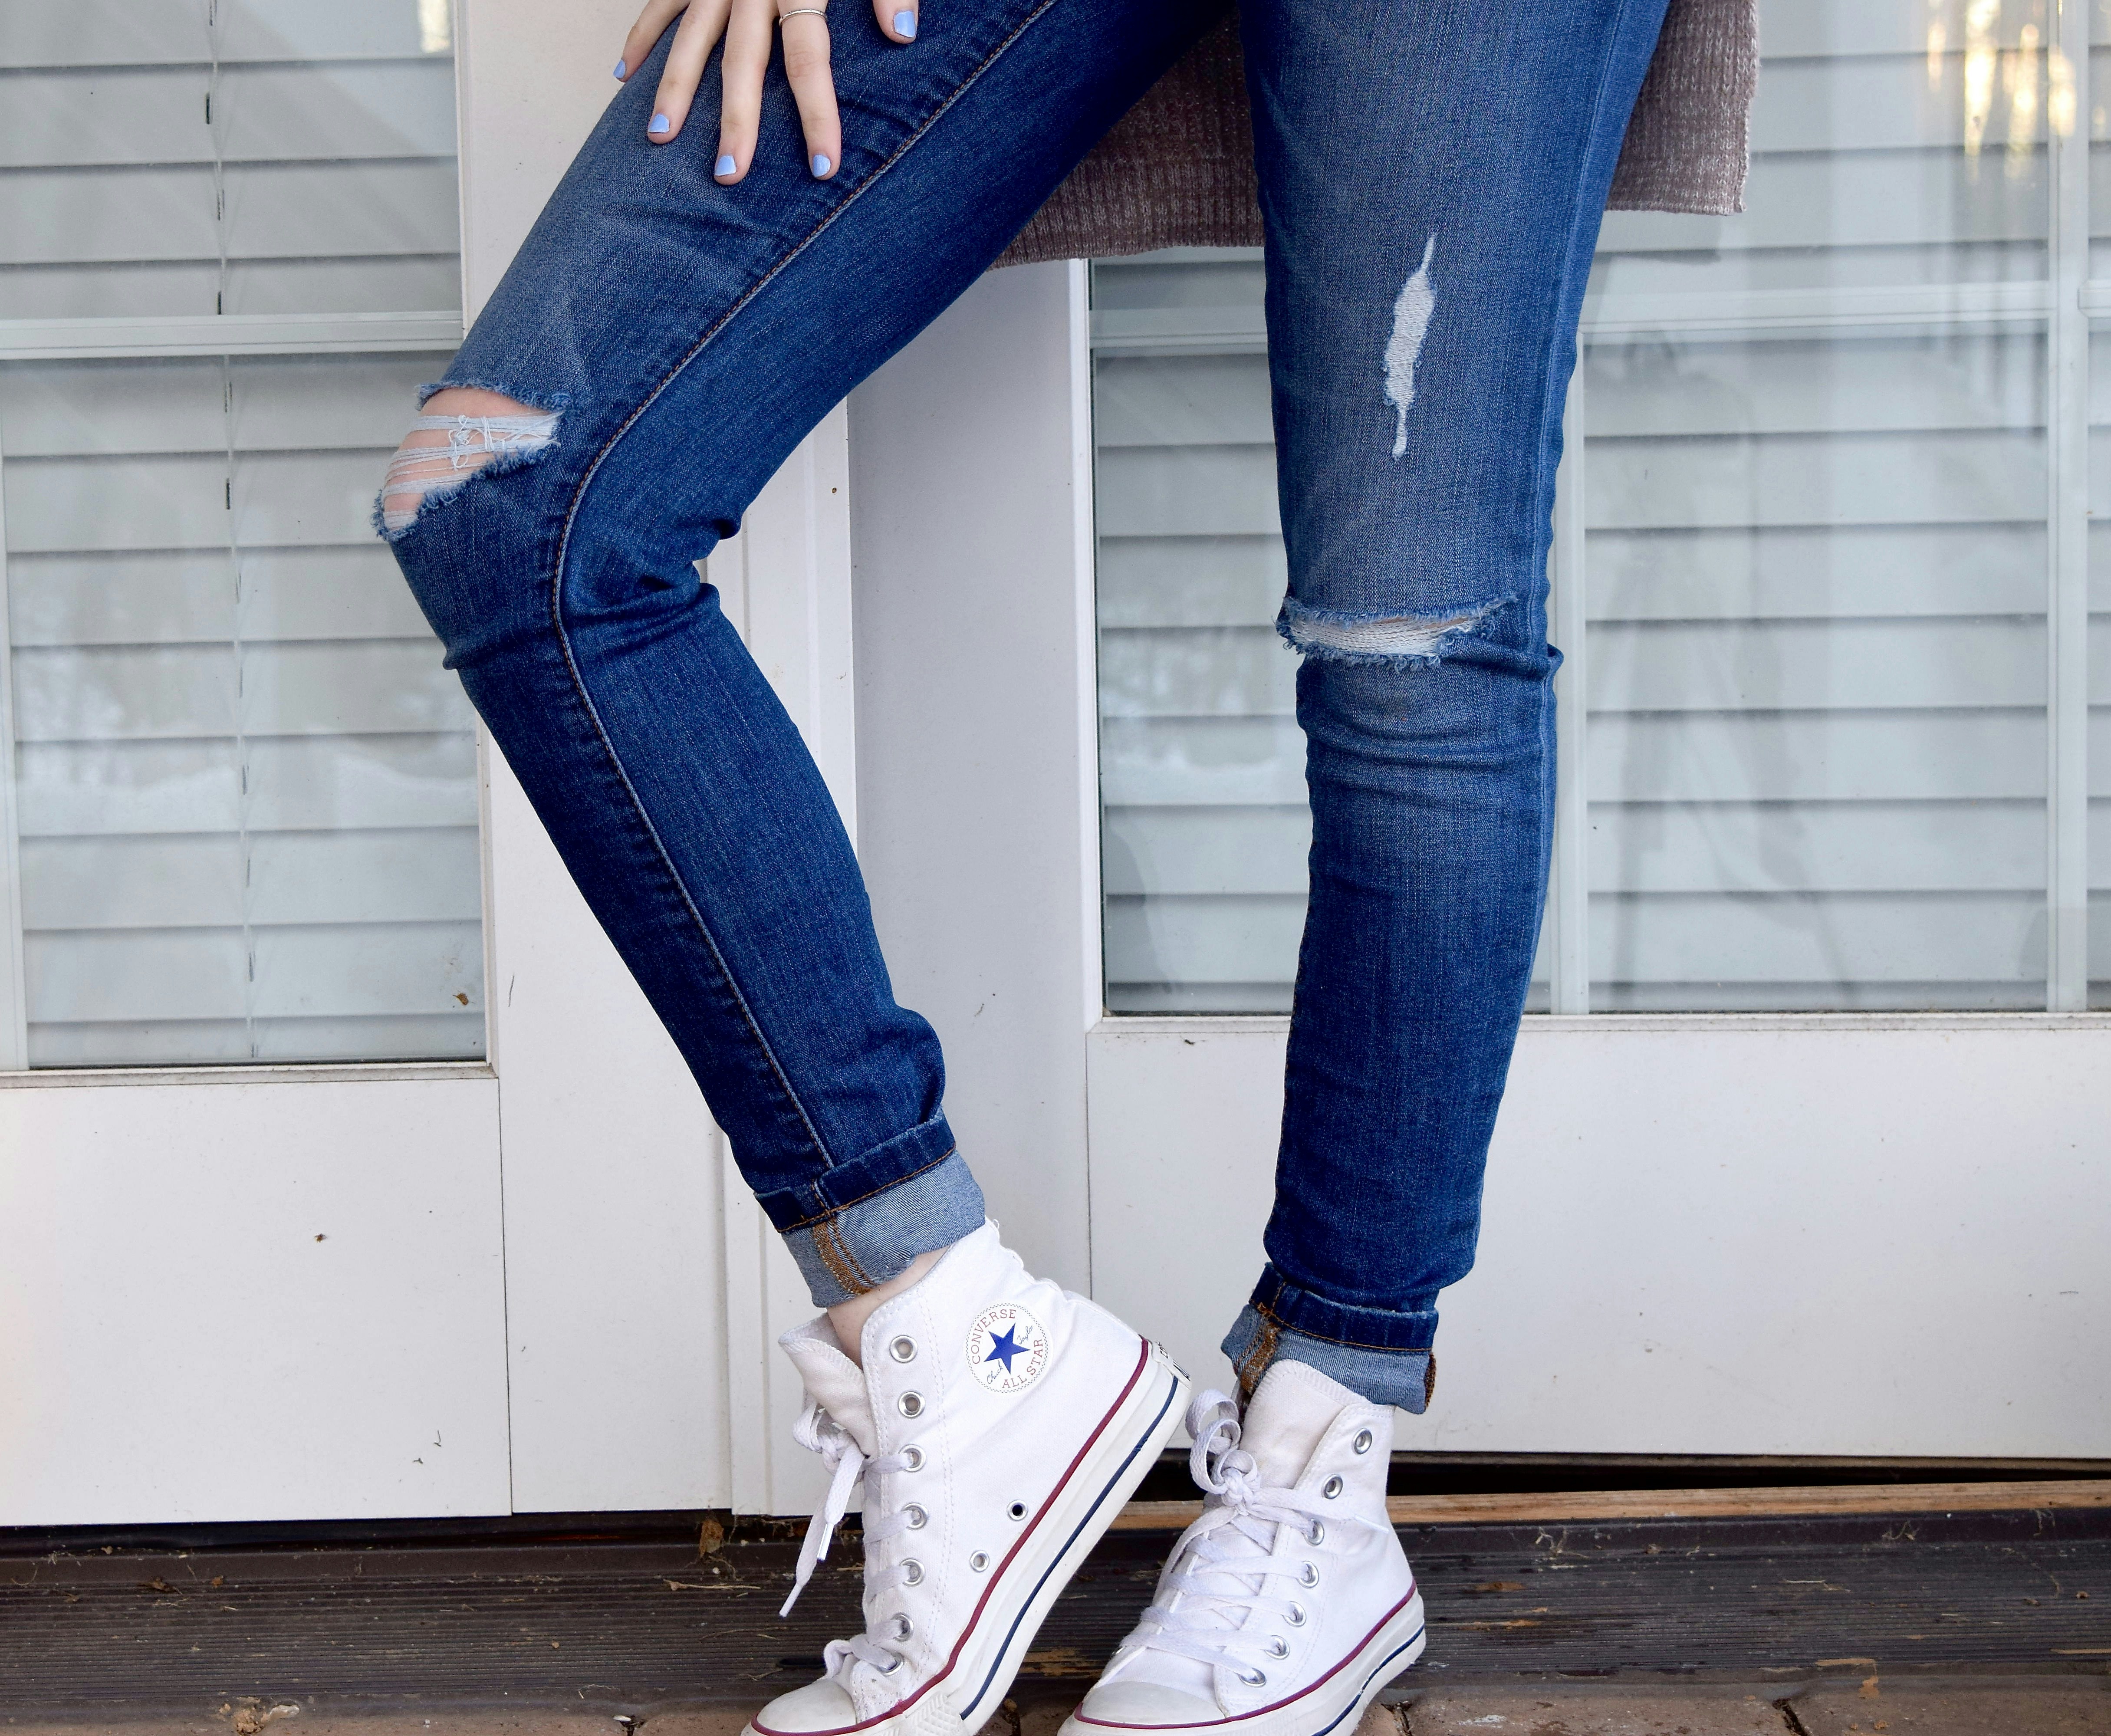 converse with jeans women's